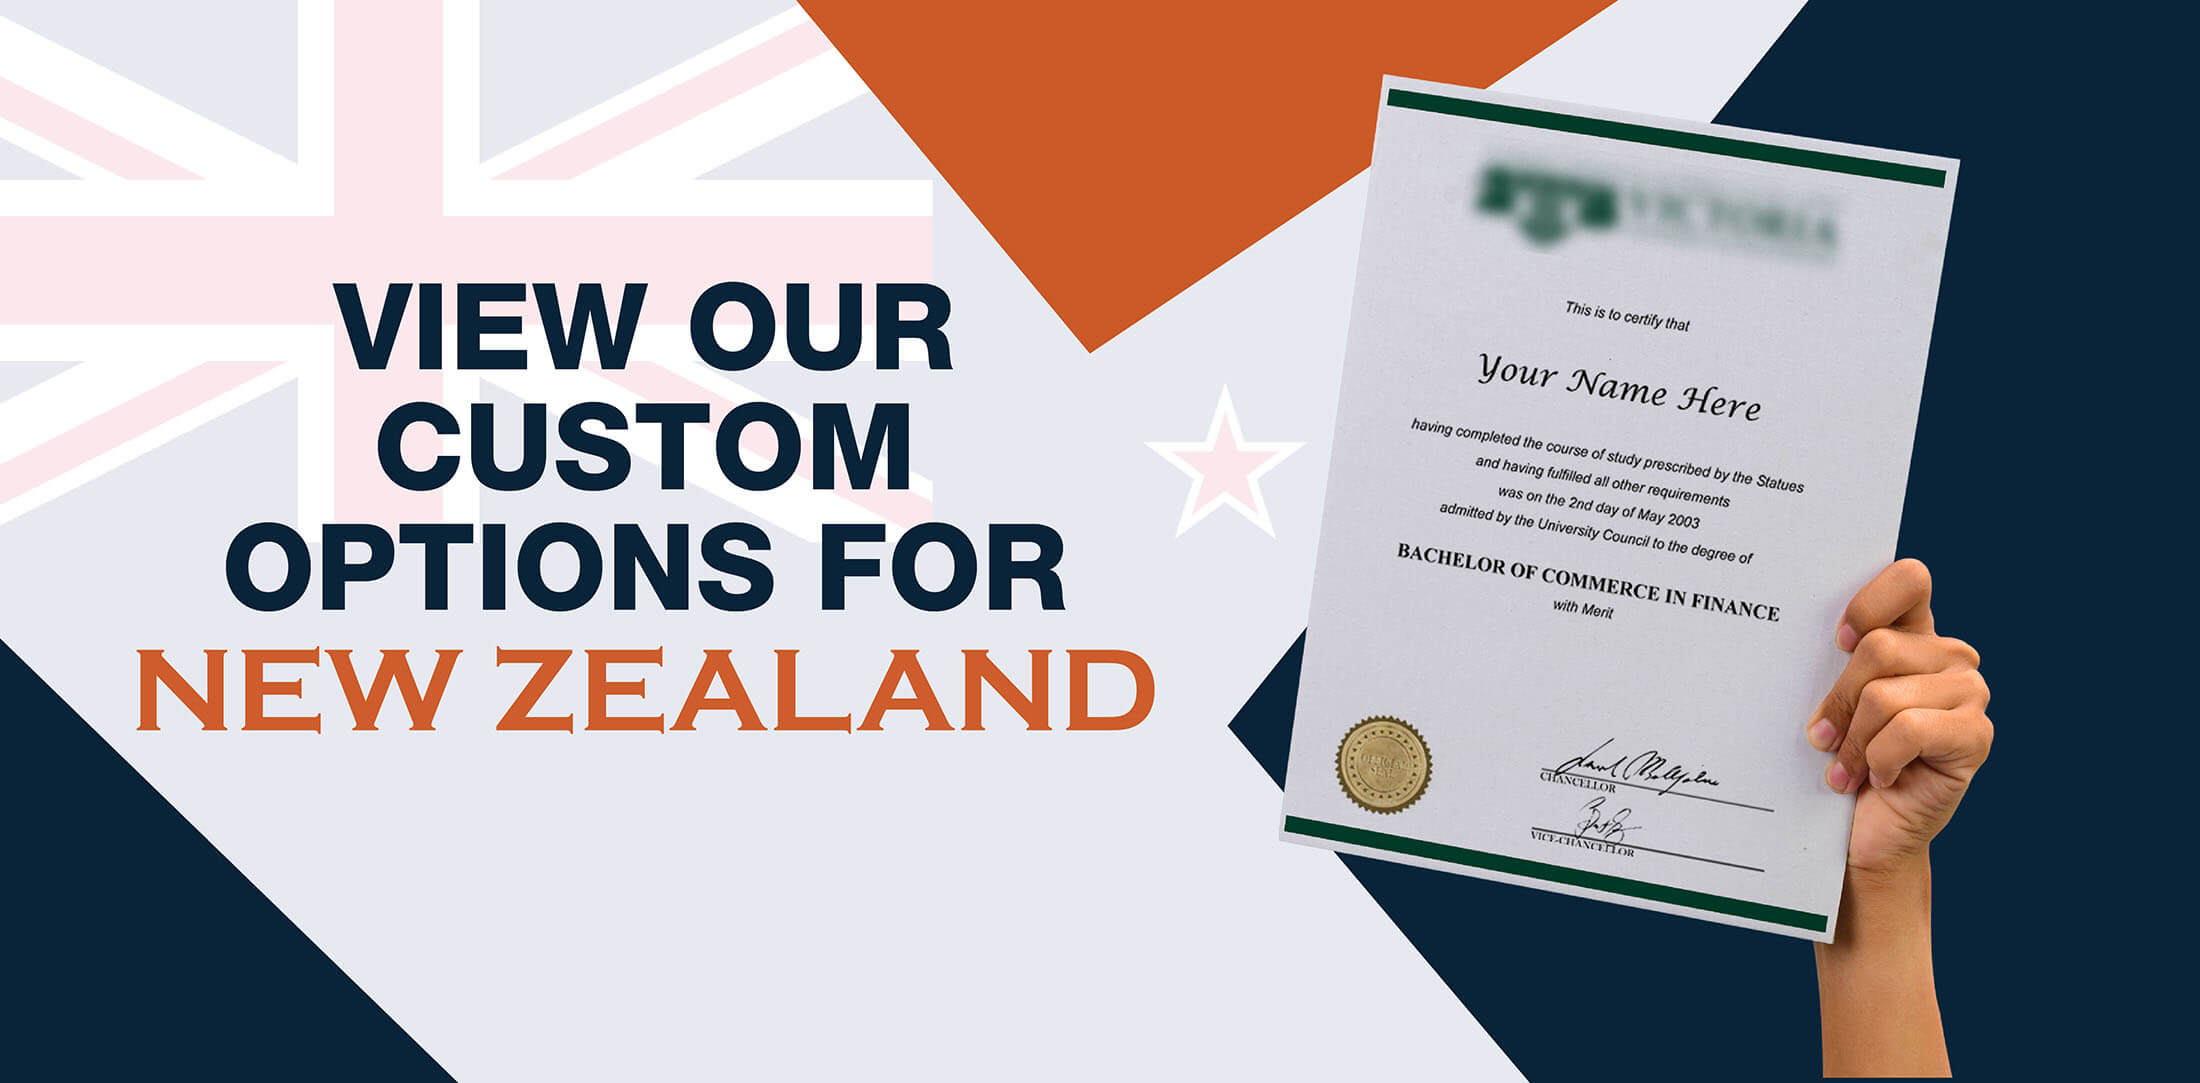 Fake New Zealand Documents: High Quality College and University Replicas Fast!